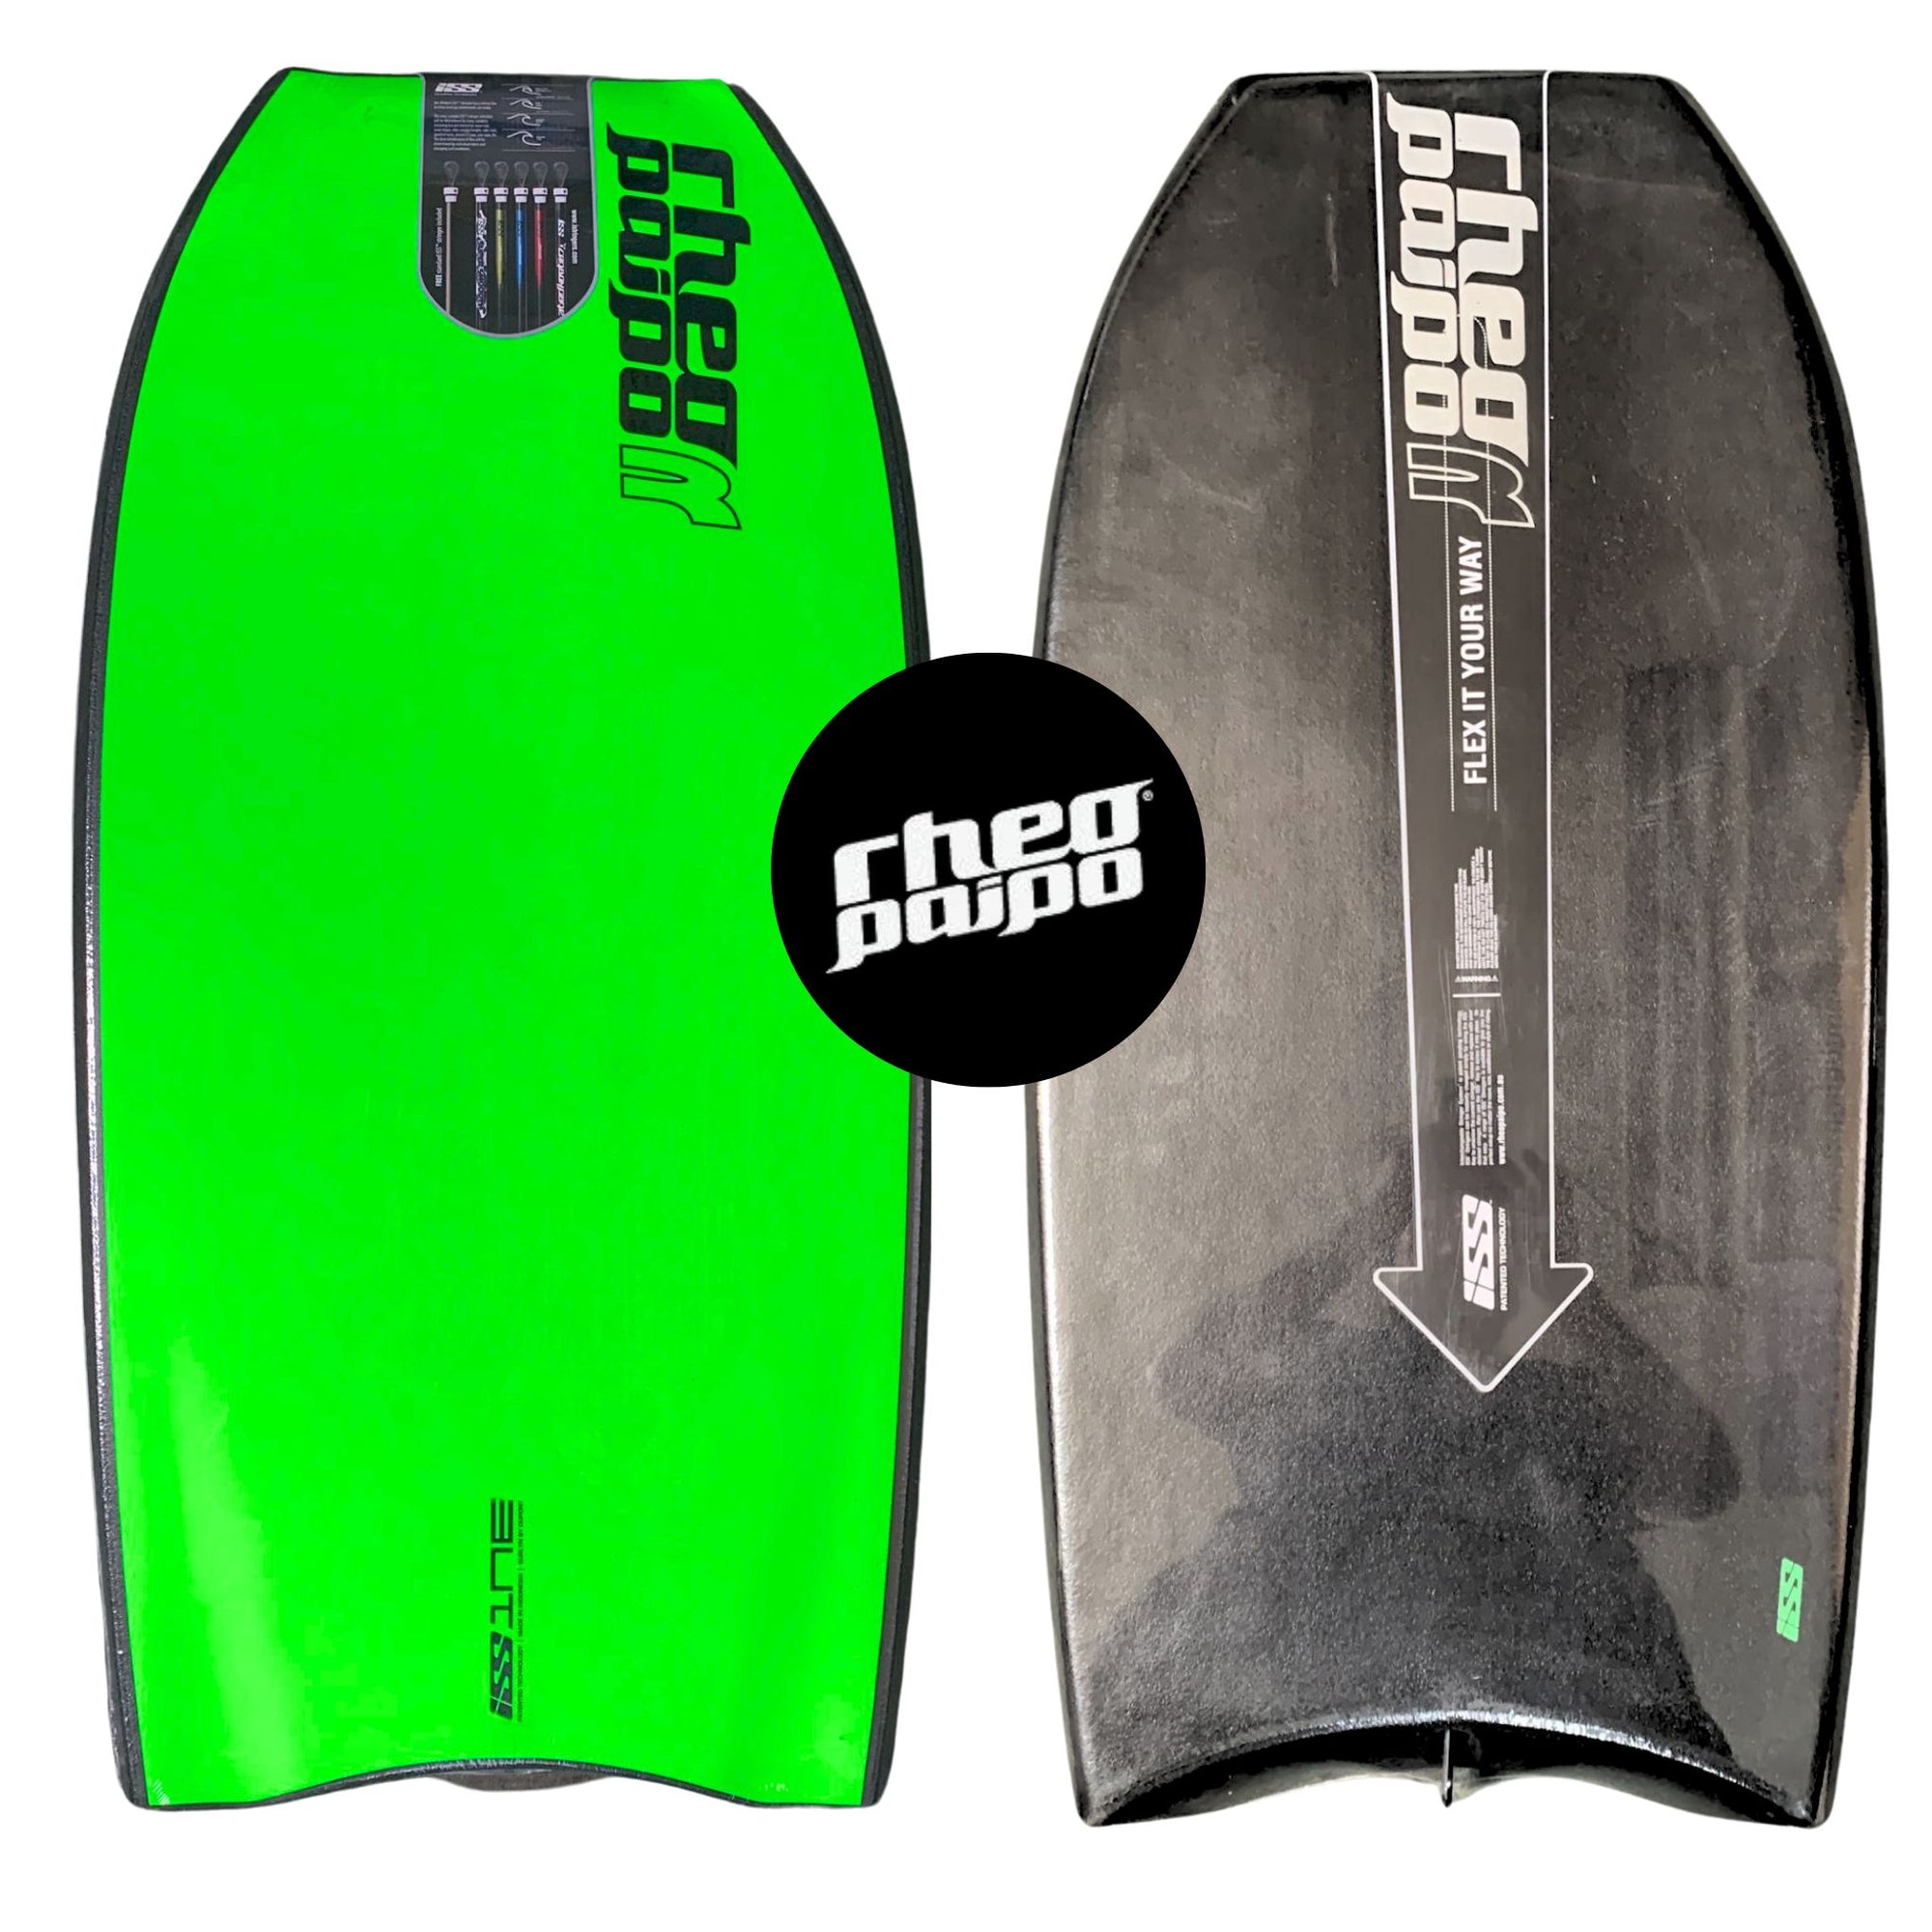 RheoPaipo ISS Body Board GREEN/BLACK 1NE, D-CORE 41" - South East Clearance Centre